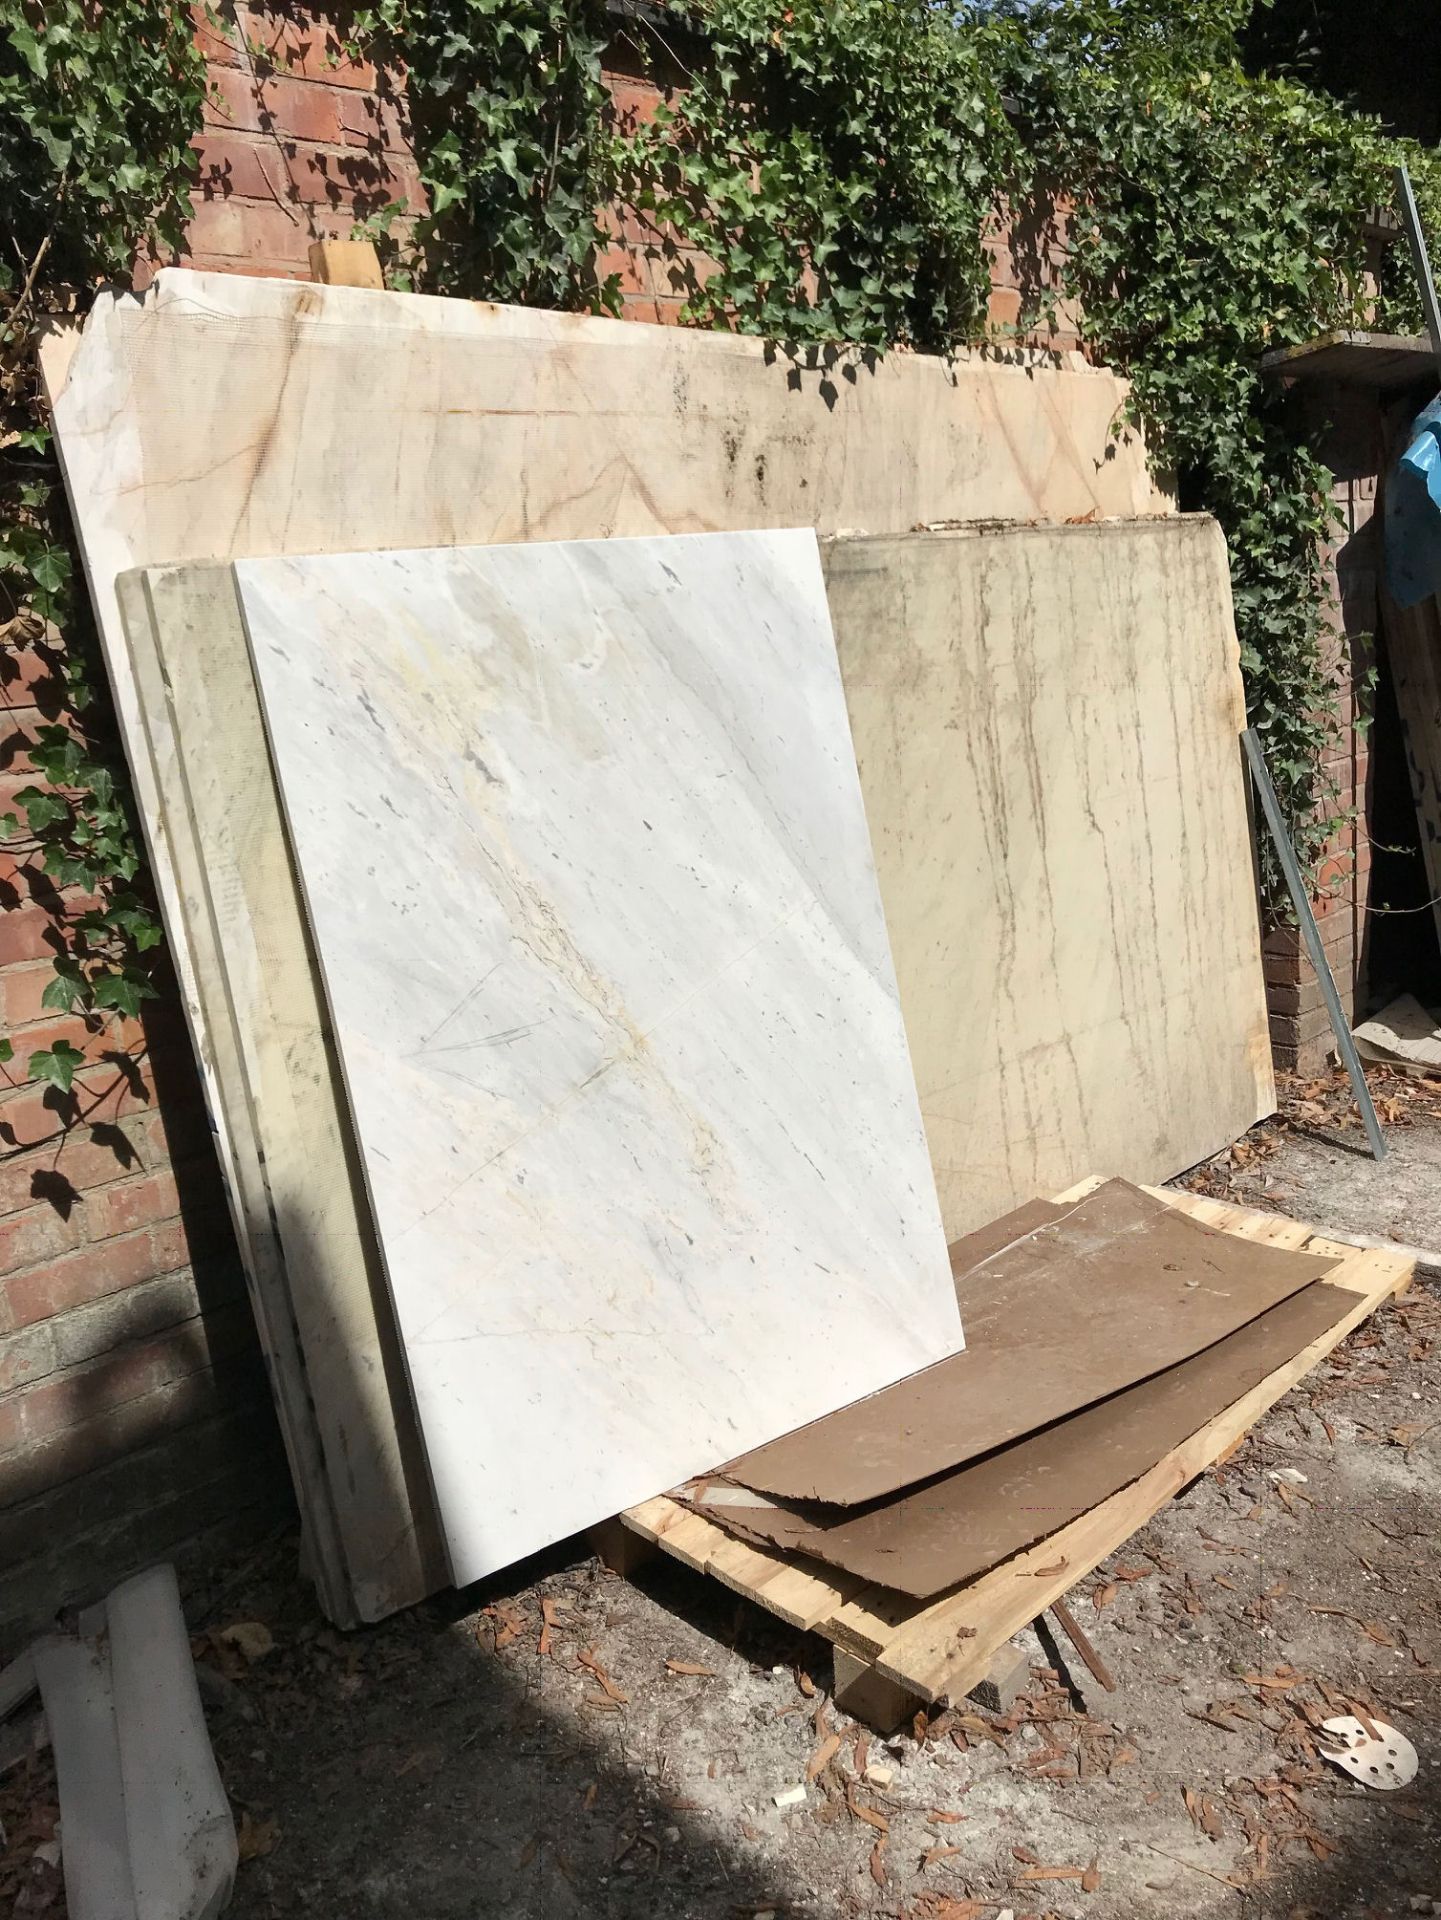 3 x Calacatta Marble Sheets - Approx. 2.5 x 1.5m Each - 20mm Thick - CL312 - Location: